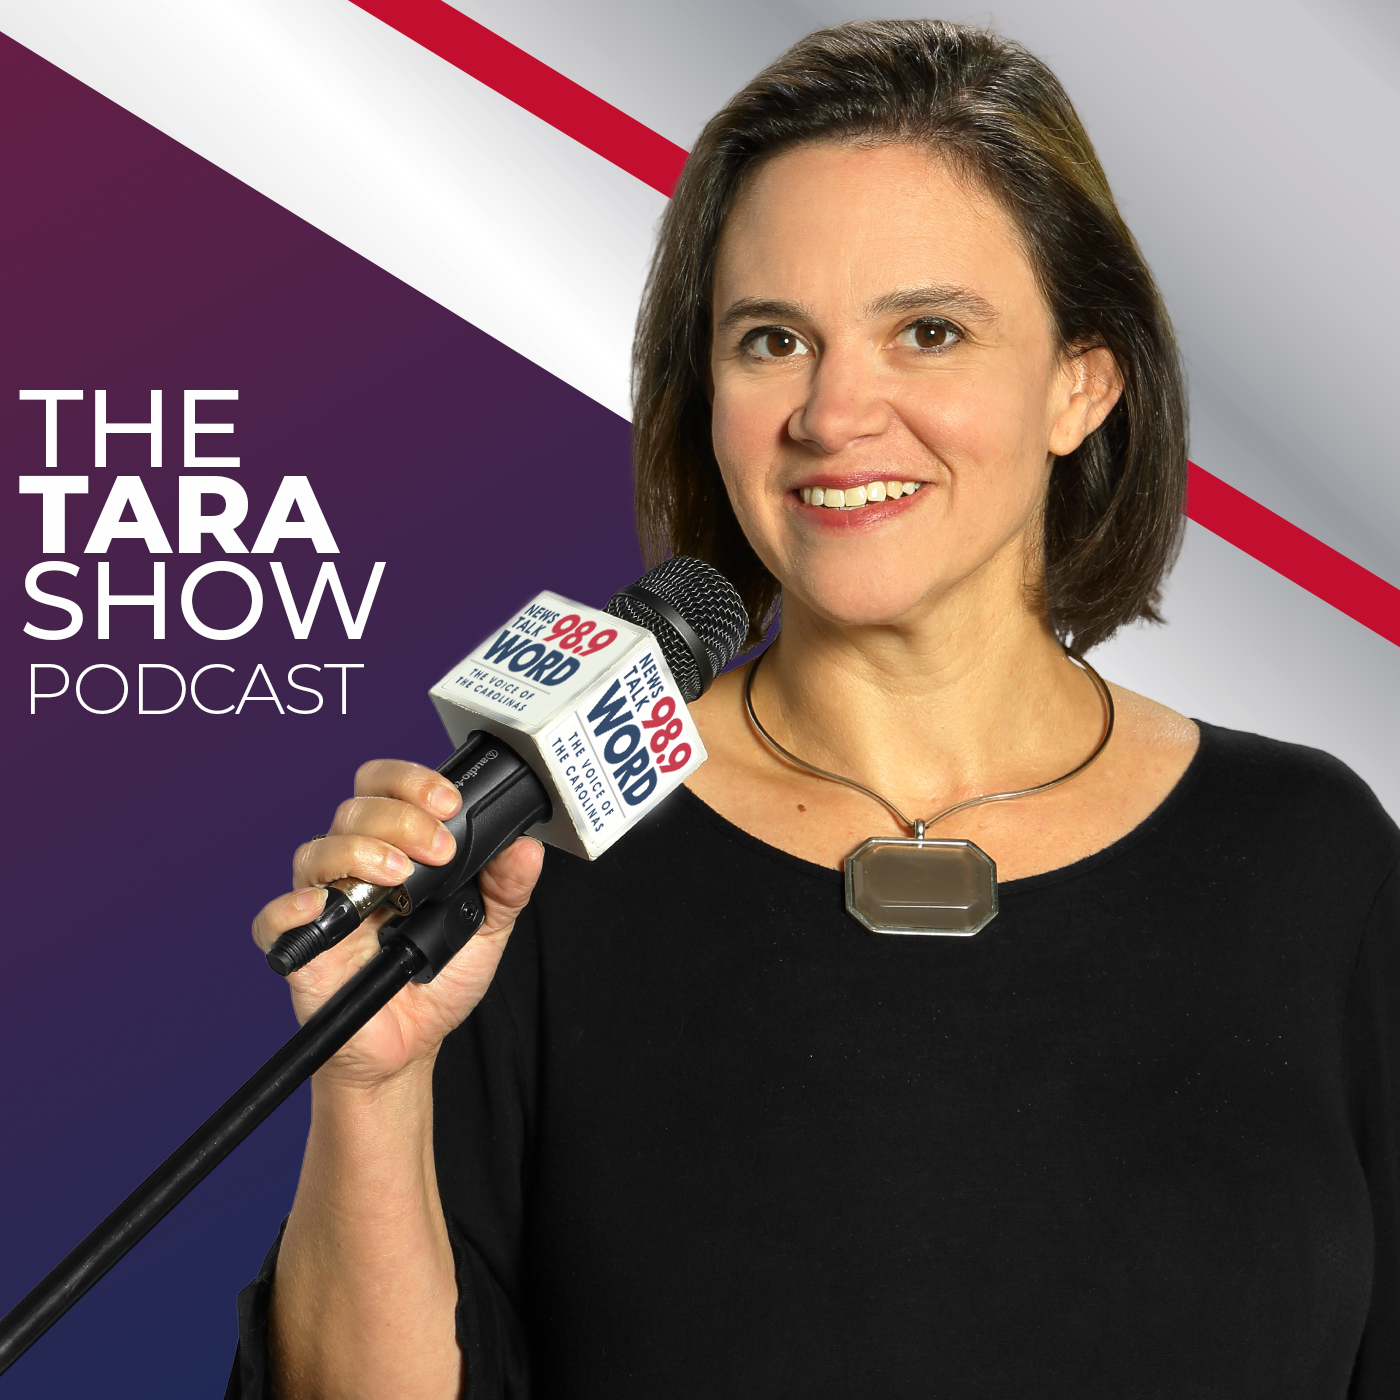 Hour 4: The Tara Show - “Joe's Uncle Eaten by Cannibals” “New Bird Flu Spread” “Dan Nickles Running for Senate District 6” “Trump’s Re-Election Campaign” 